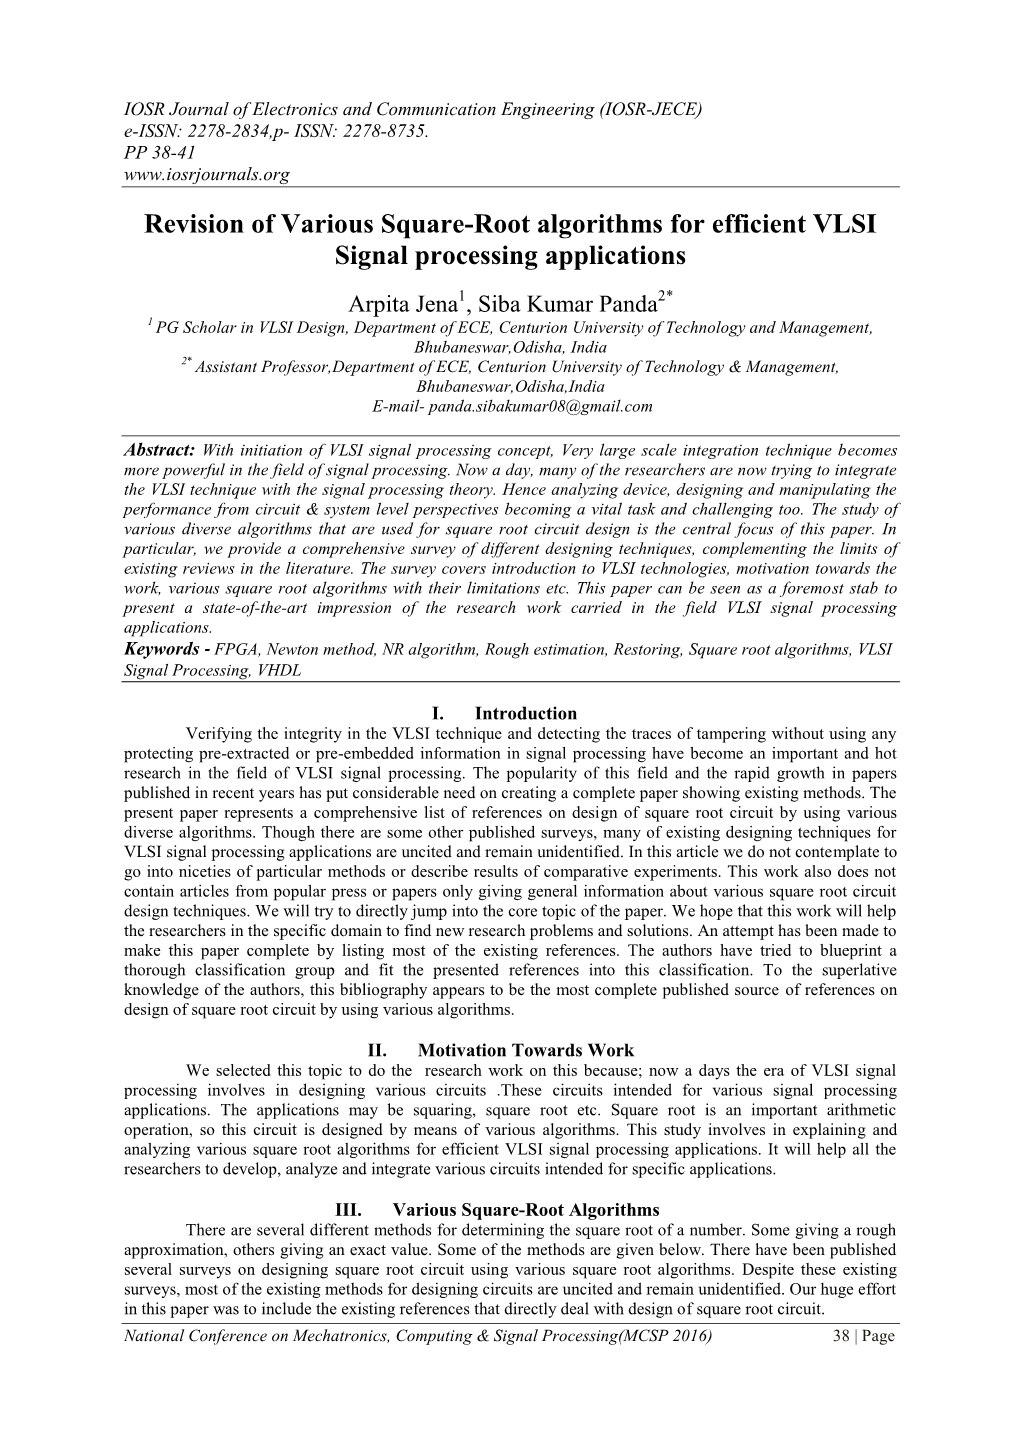 Revision of Various Square-Root Algorithms for Efficient VLSI Signal Processing Applications